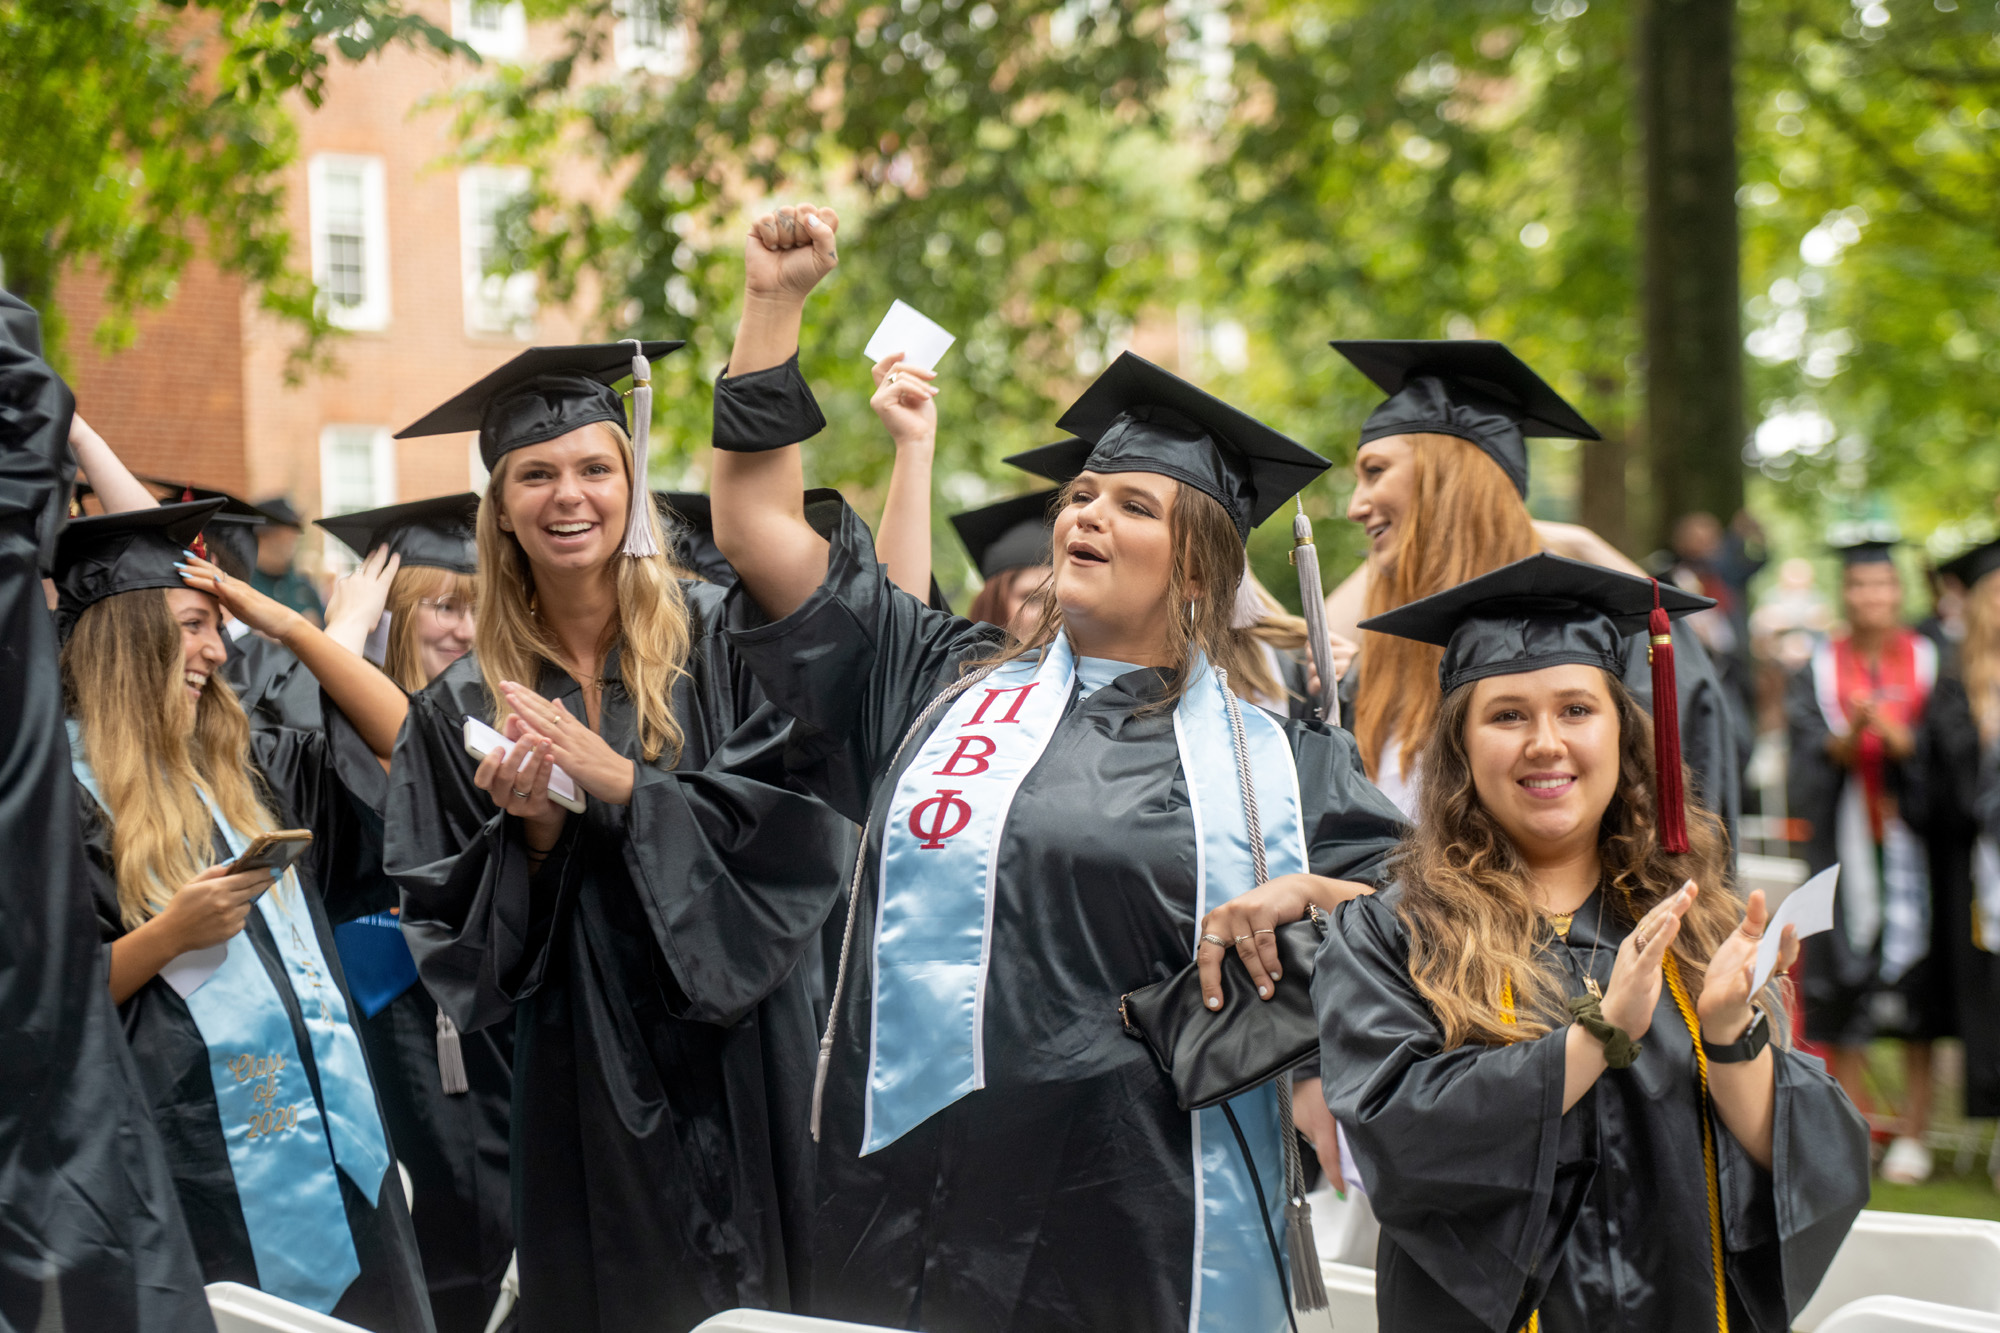 A group of female students cheer on their graduating classmates